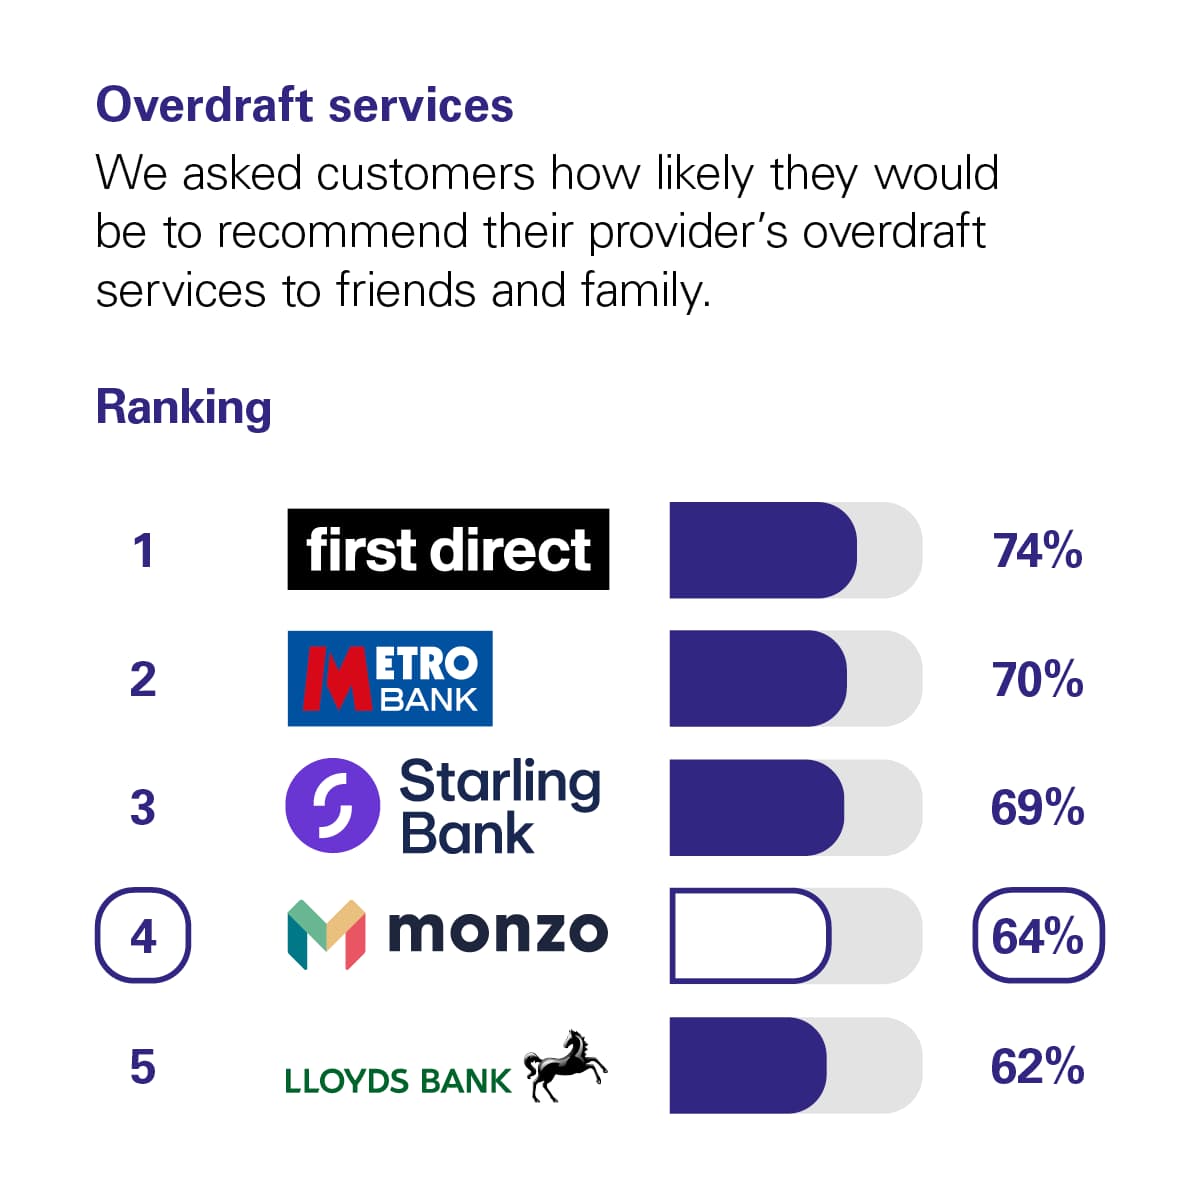 Graph showing the results of the CMA scoring of UK banks in the Overdraft Services category. The CMA asked customers how likely they would be to recommend their provider's overdraft services to friends and family. The rankings with percentage scores are: 1st First Direct with 74%. 2nd Metro Bank with 70%. 3rd Starling Bank with 69%. 4th Monzo with 64%. 5th Lloyds Bank with 62%.